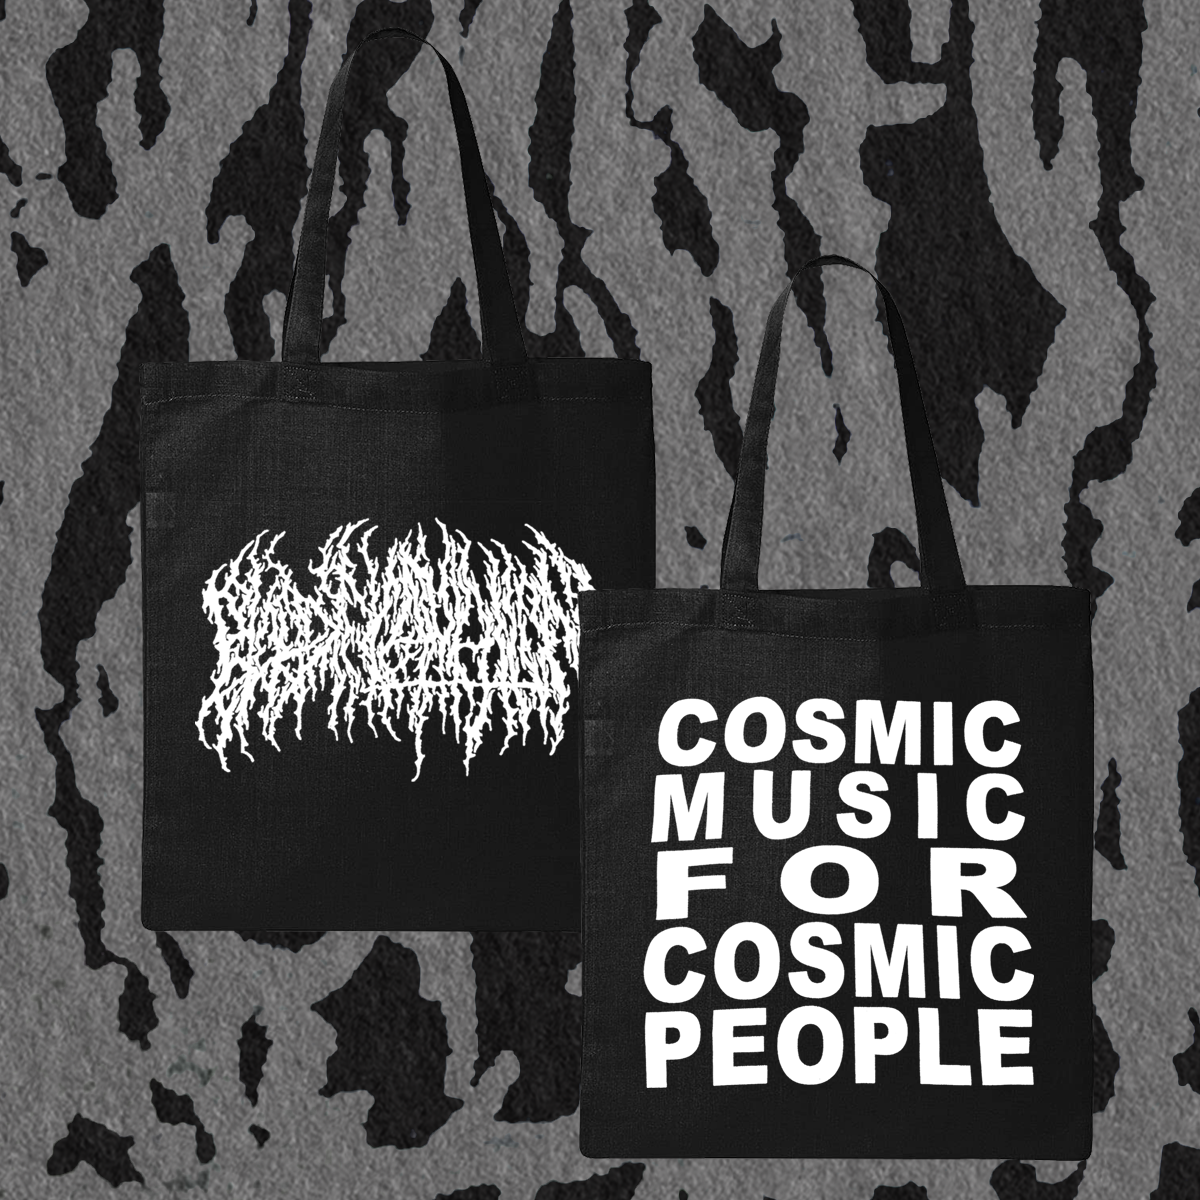 BLOOD INCANTATION "COSMIC MUSIC FOR COSMIC PEOPLE" TOTE